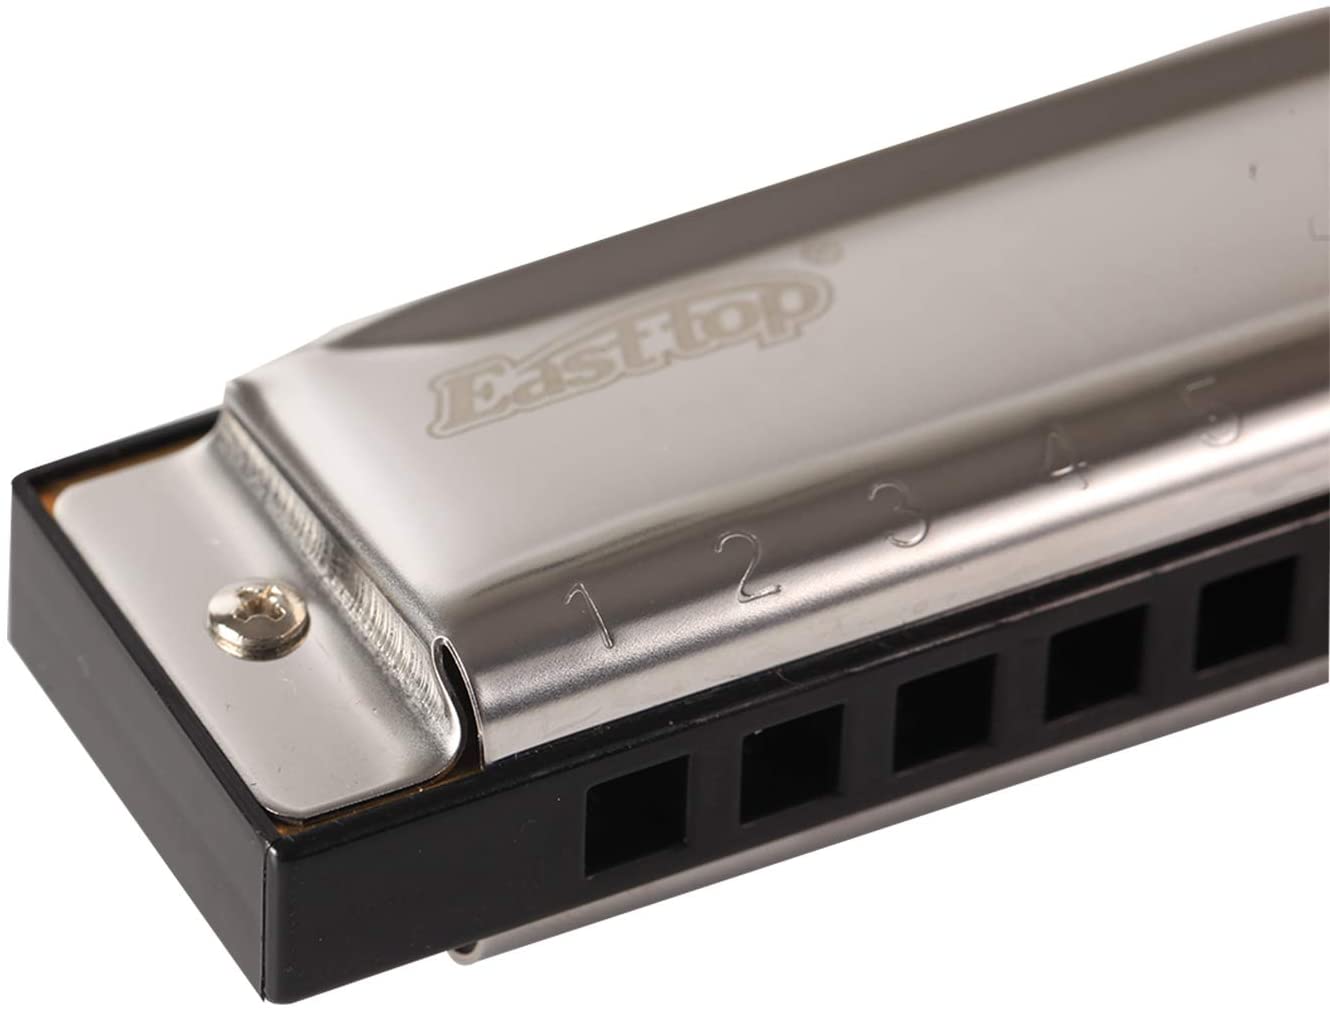 East top 10 Holes 20 Tones Blues C Diatonic Harmonica, Harmonica C For Adults, Beginners, Professional player and Students - Easttop harmonica store